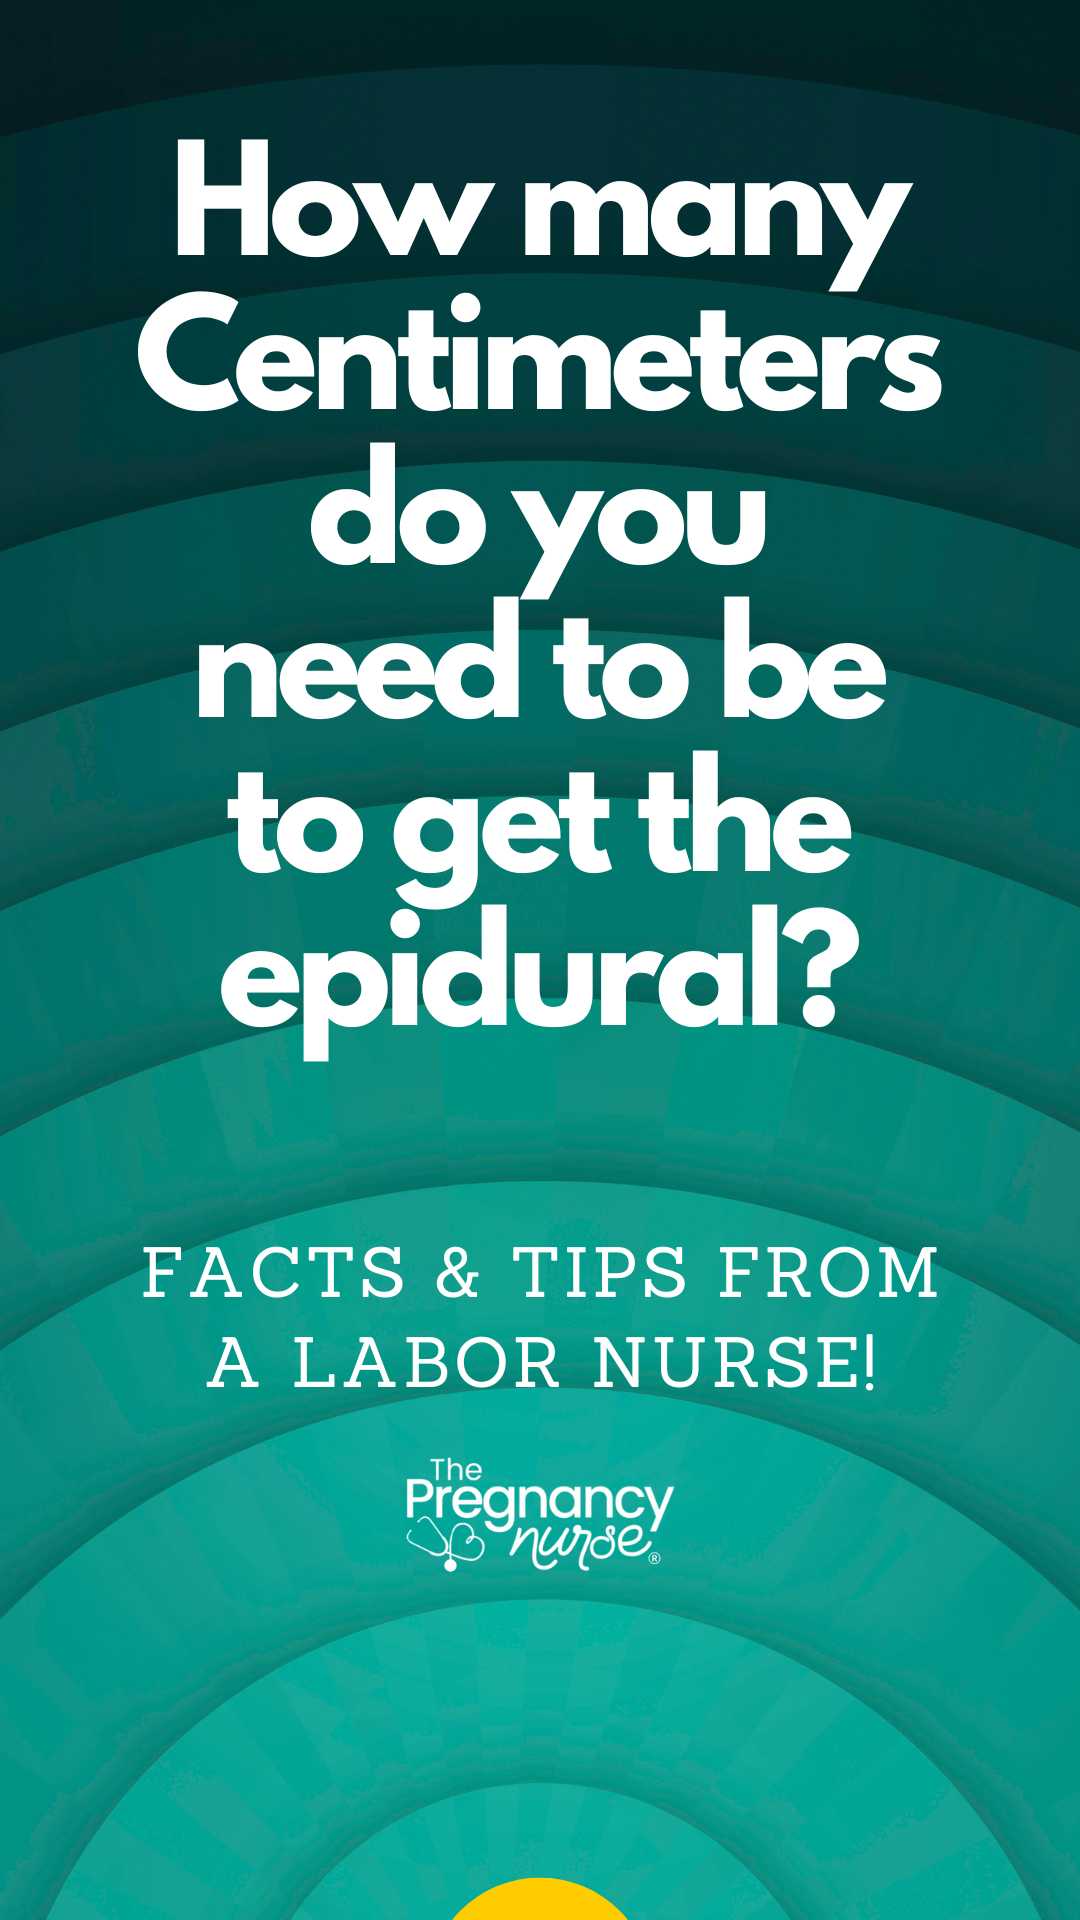 How many centimeters do you need to be to get the epidural? / facts & tips from a labor nurse / concentric circles background